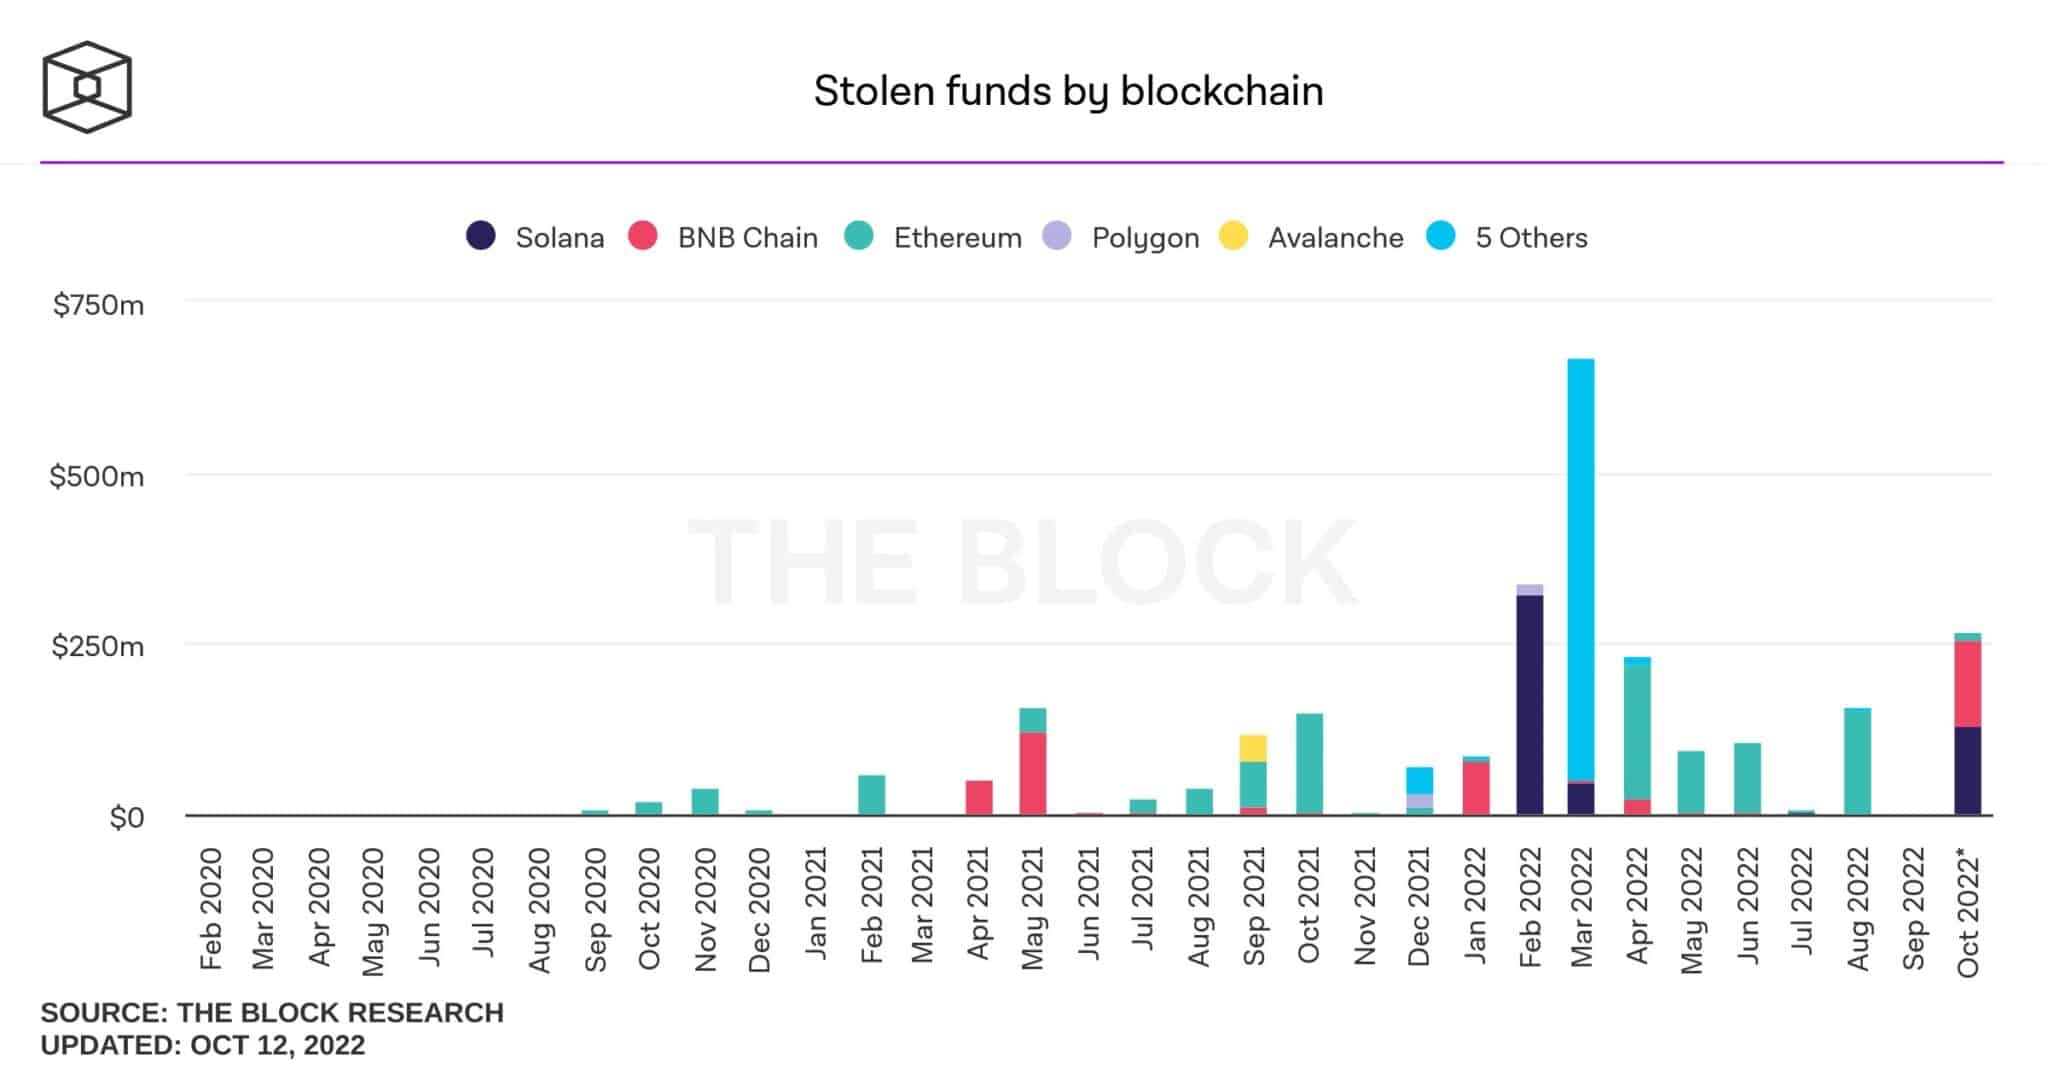 Stolen amounts sorted by period and blockchain